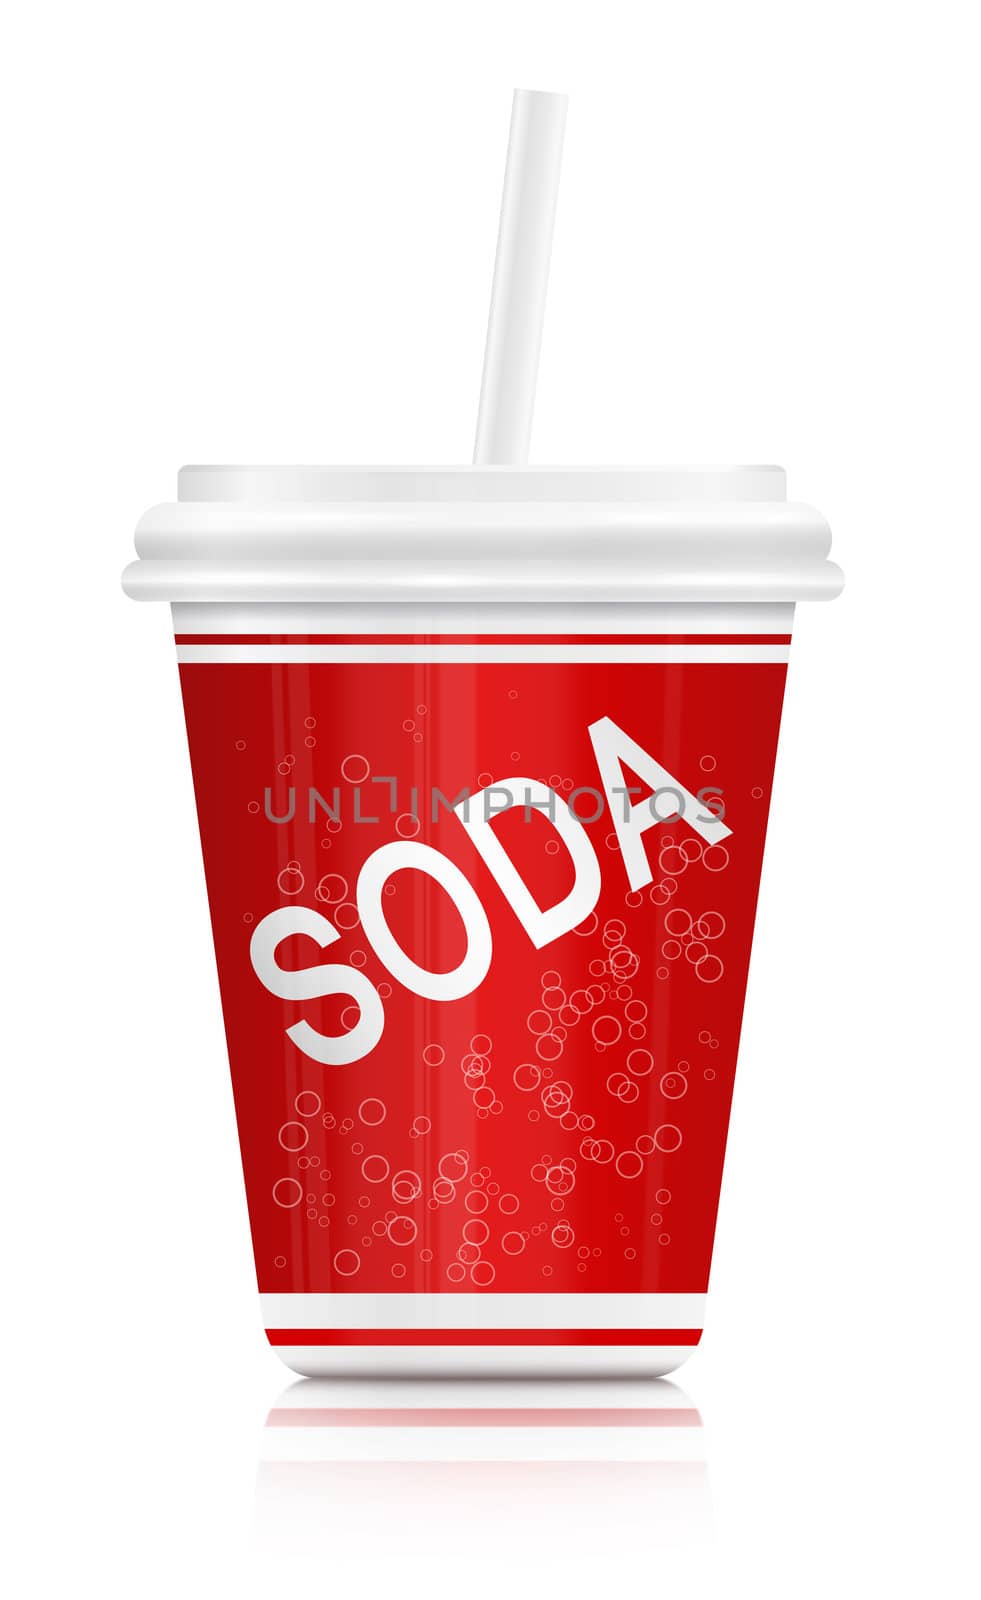 Illustration depicting a red and white fast food soda drink container. Arranged over white.